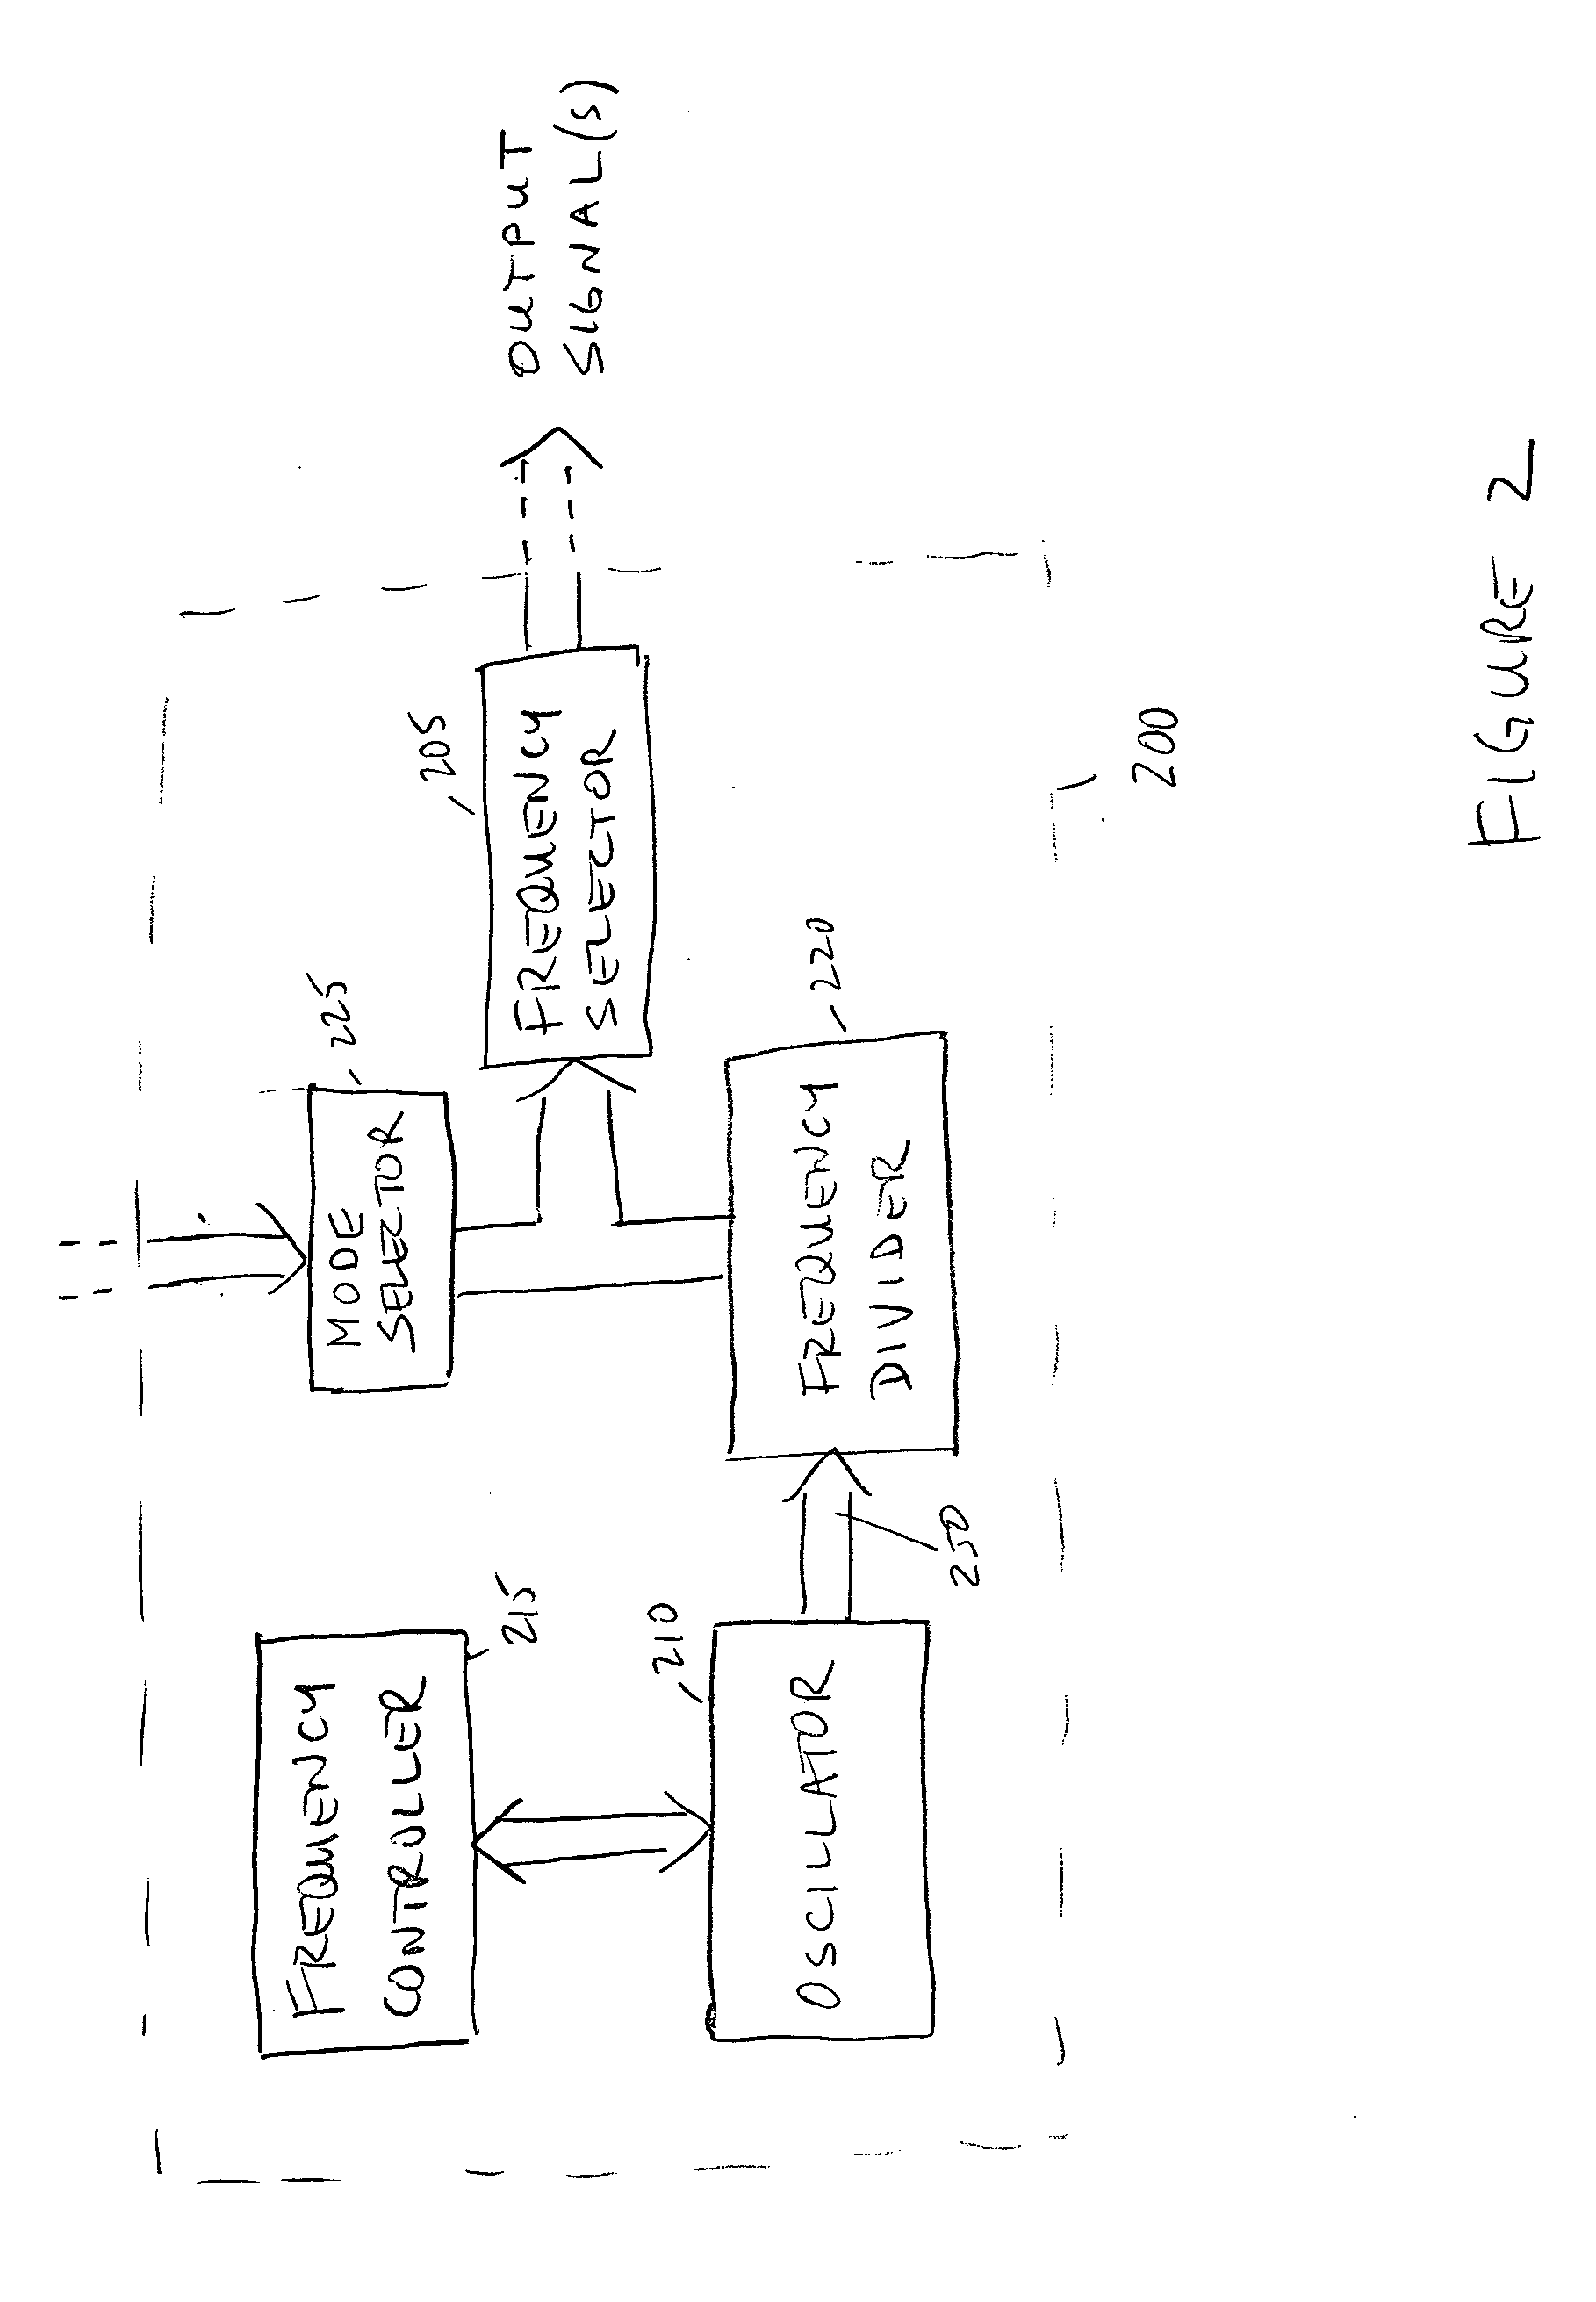 Transconductance and current modulation for resonant frequency control and selection